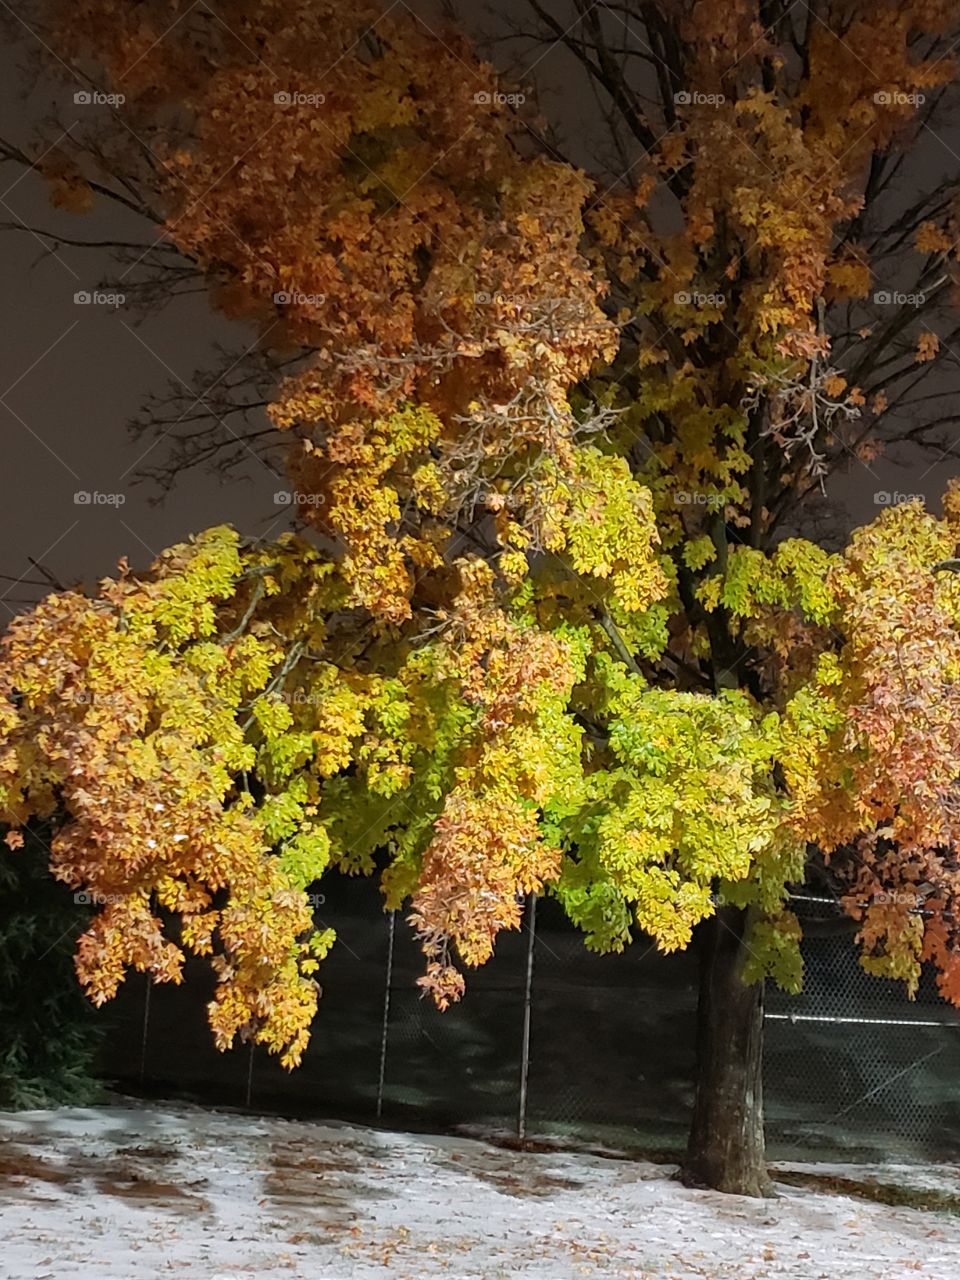 Spectacular Fall leaves - orange, yellow & green